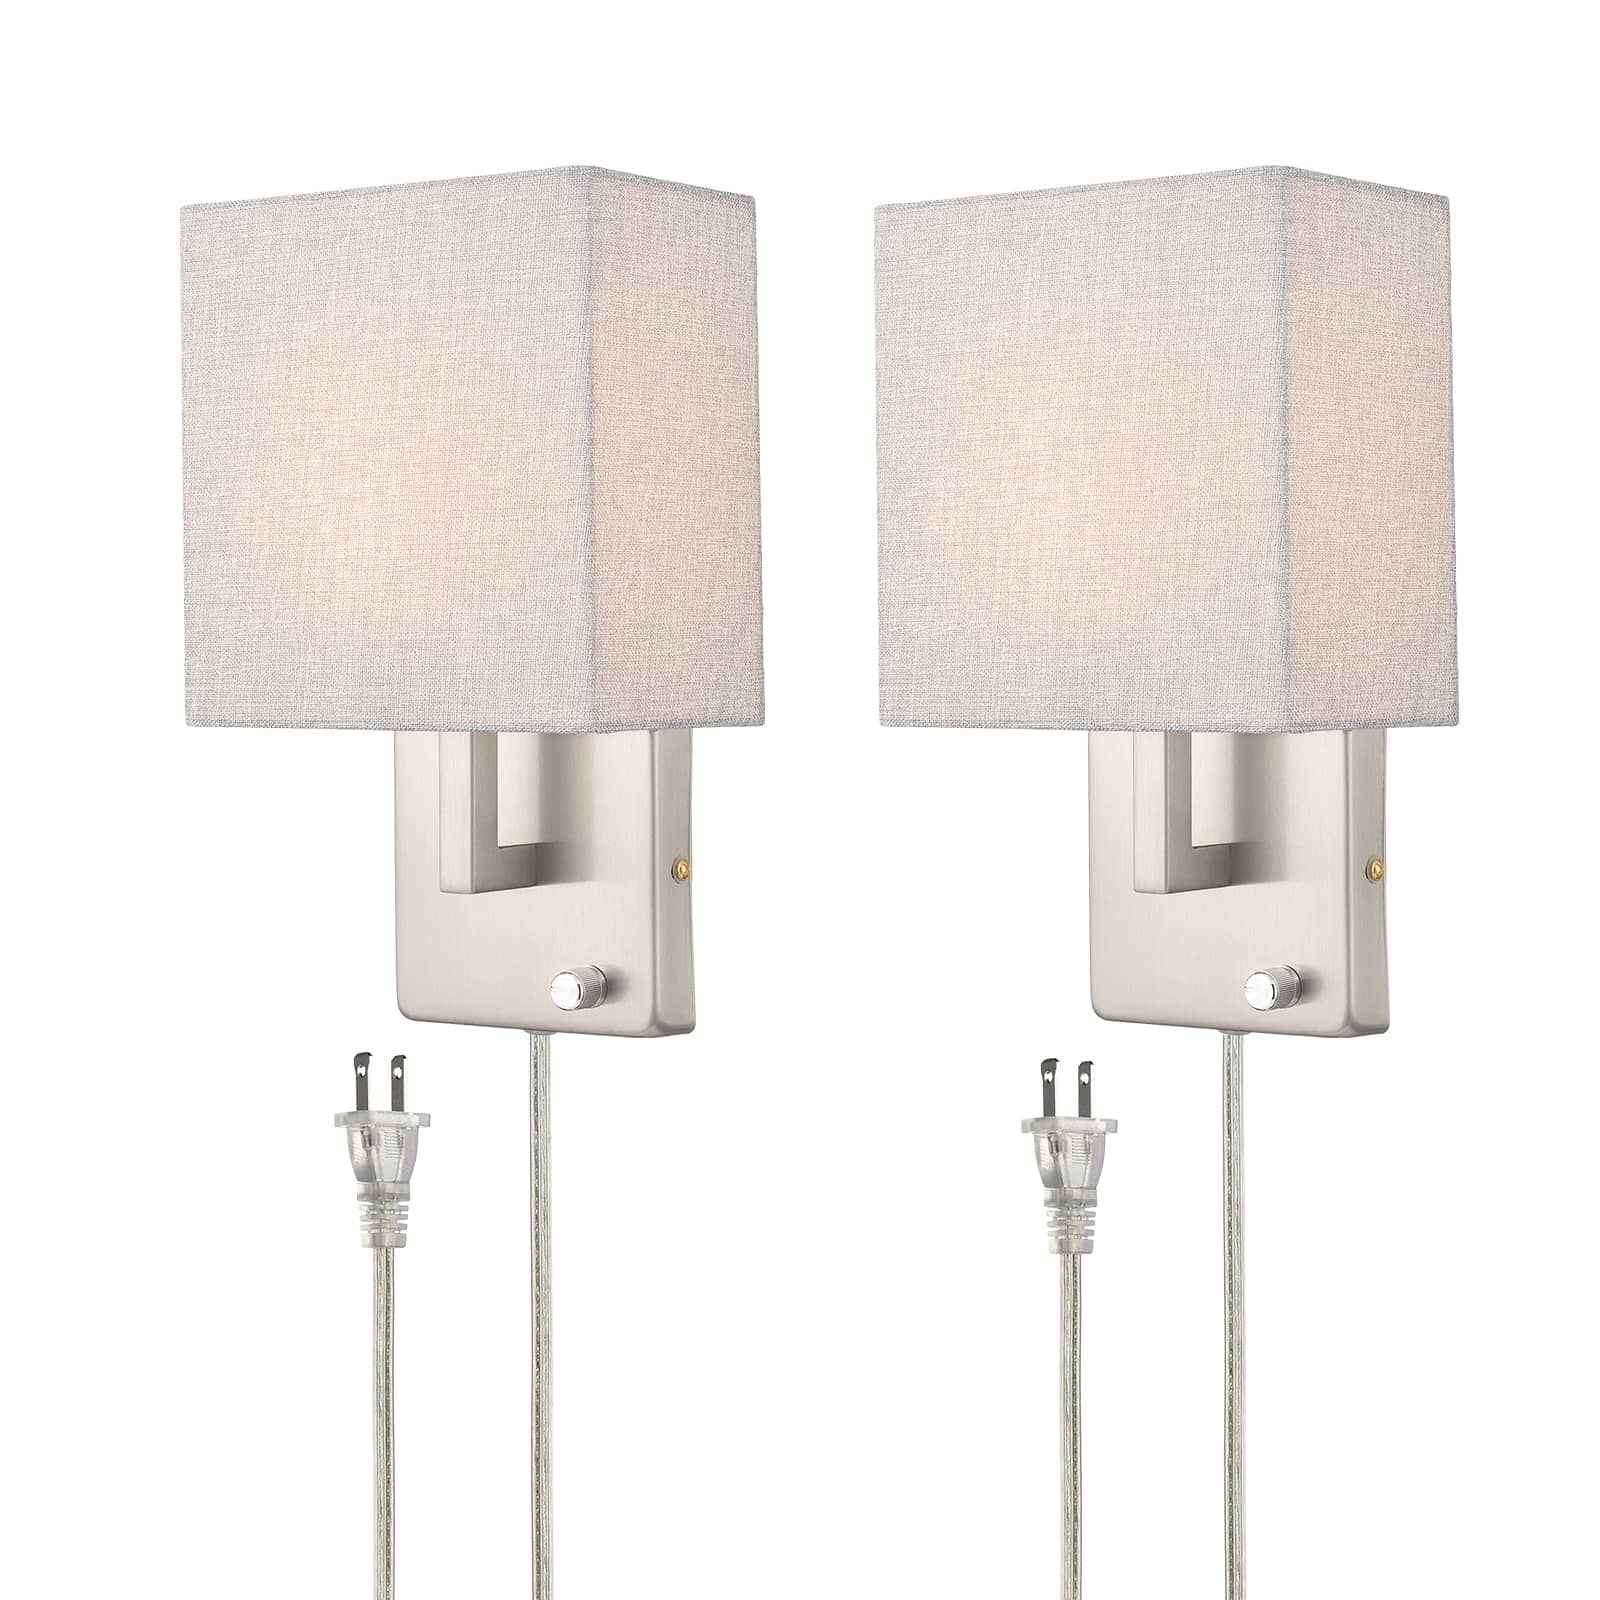 Modern Plug in Wall Sconce with Grey Fabric Shade Brushed Nickel